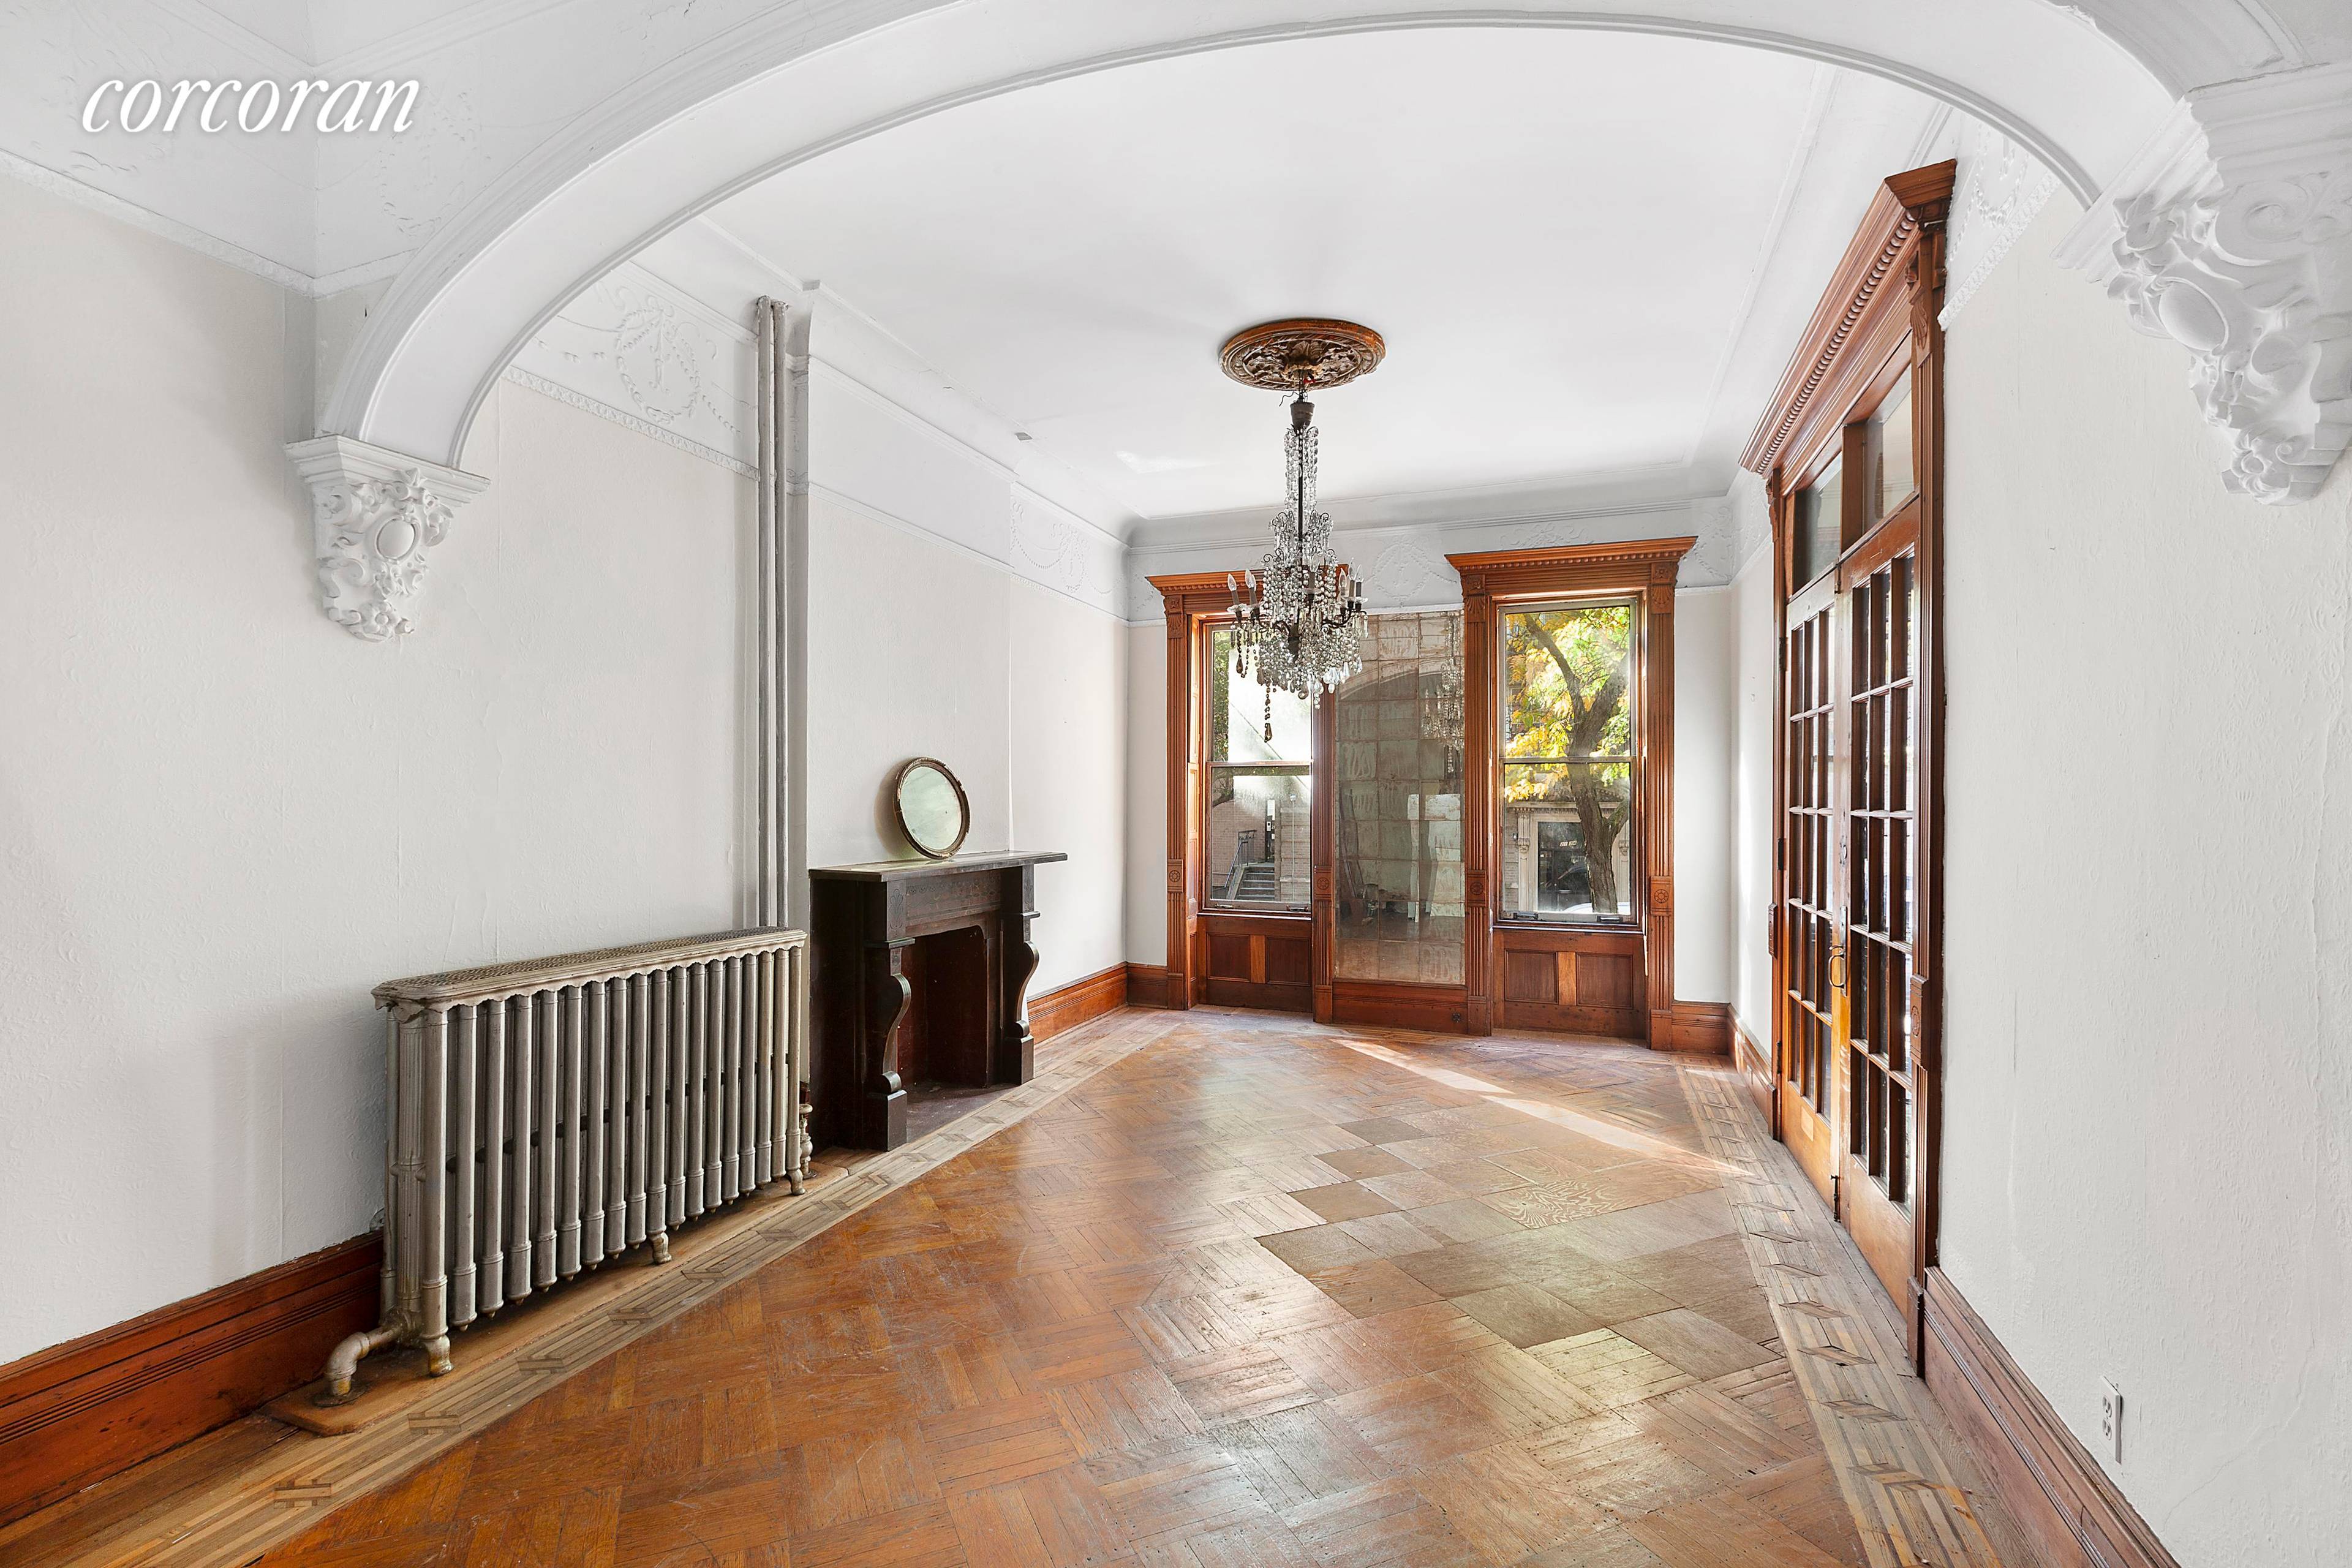 Welcome home to this exquisite 1881 townhome !